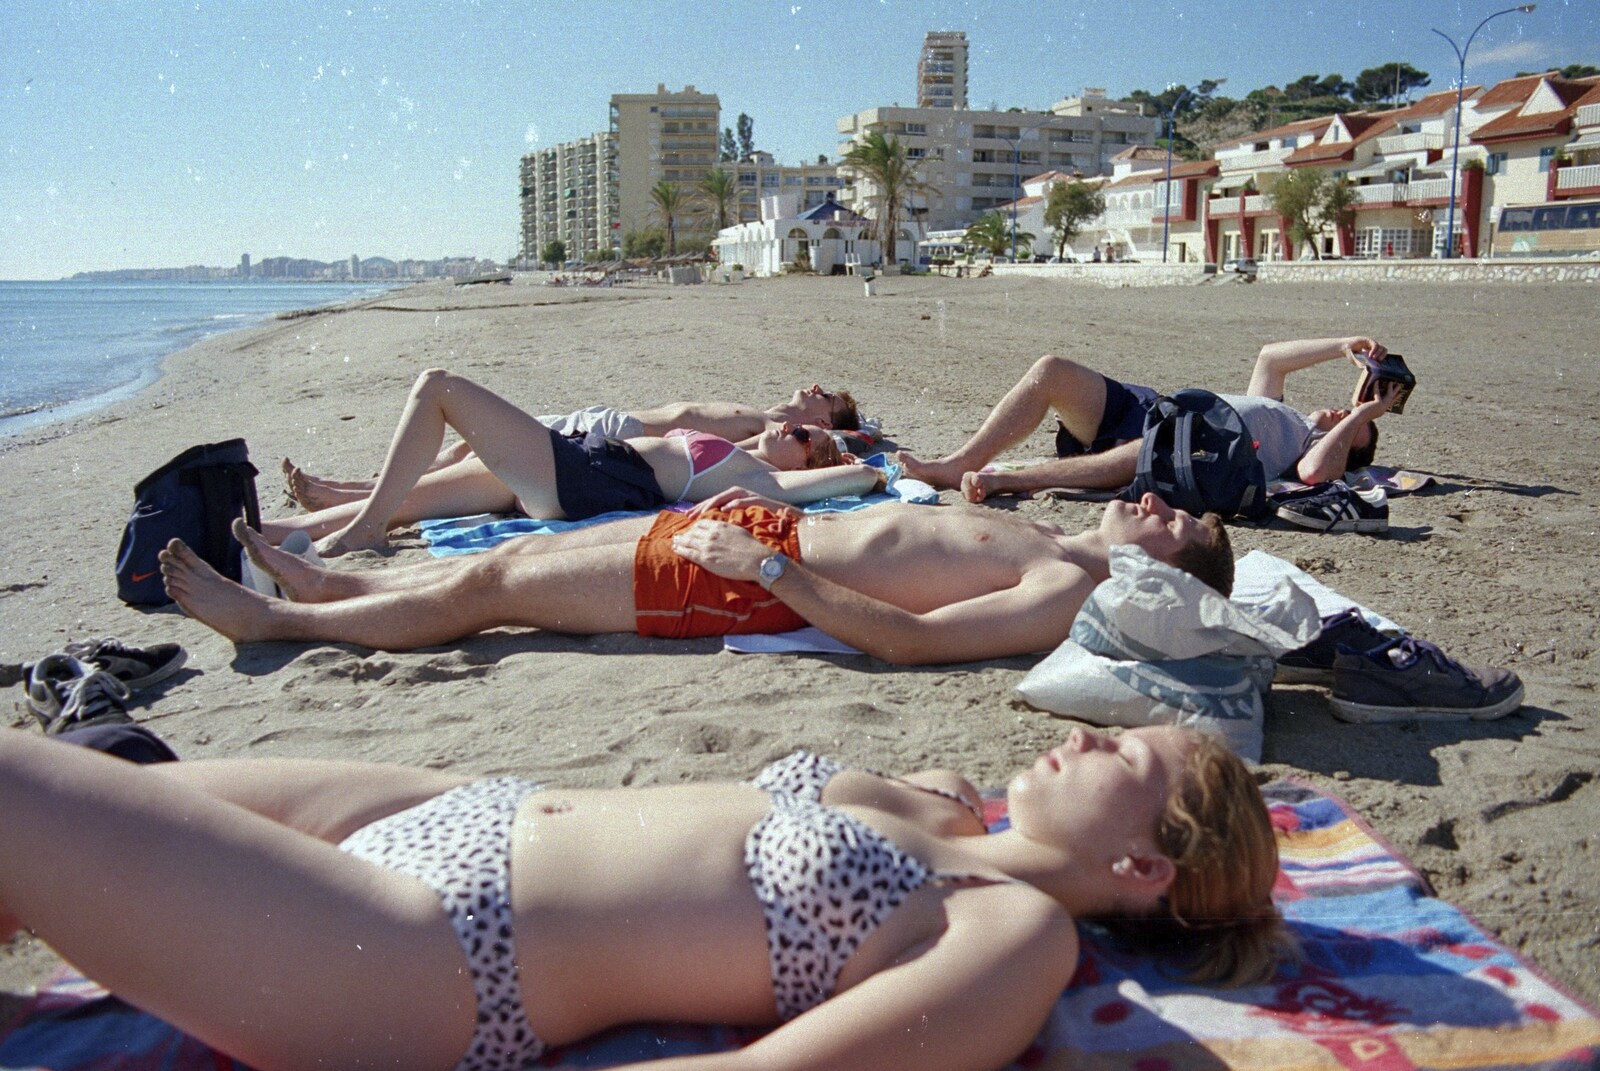 We're the only ones sunbathing from The CISU Massive do Malaga, Spain - November 14th 1998